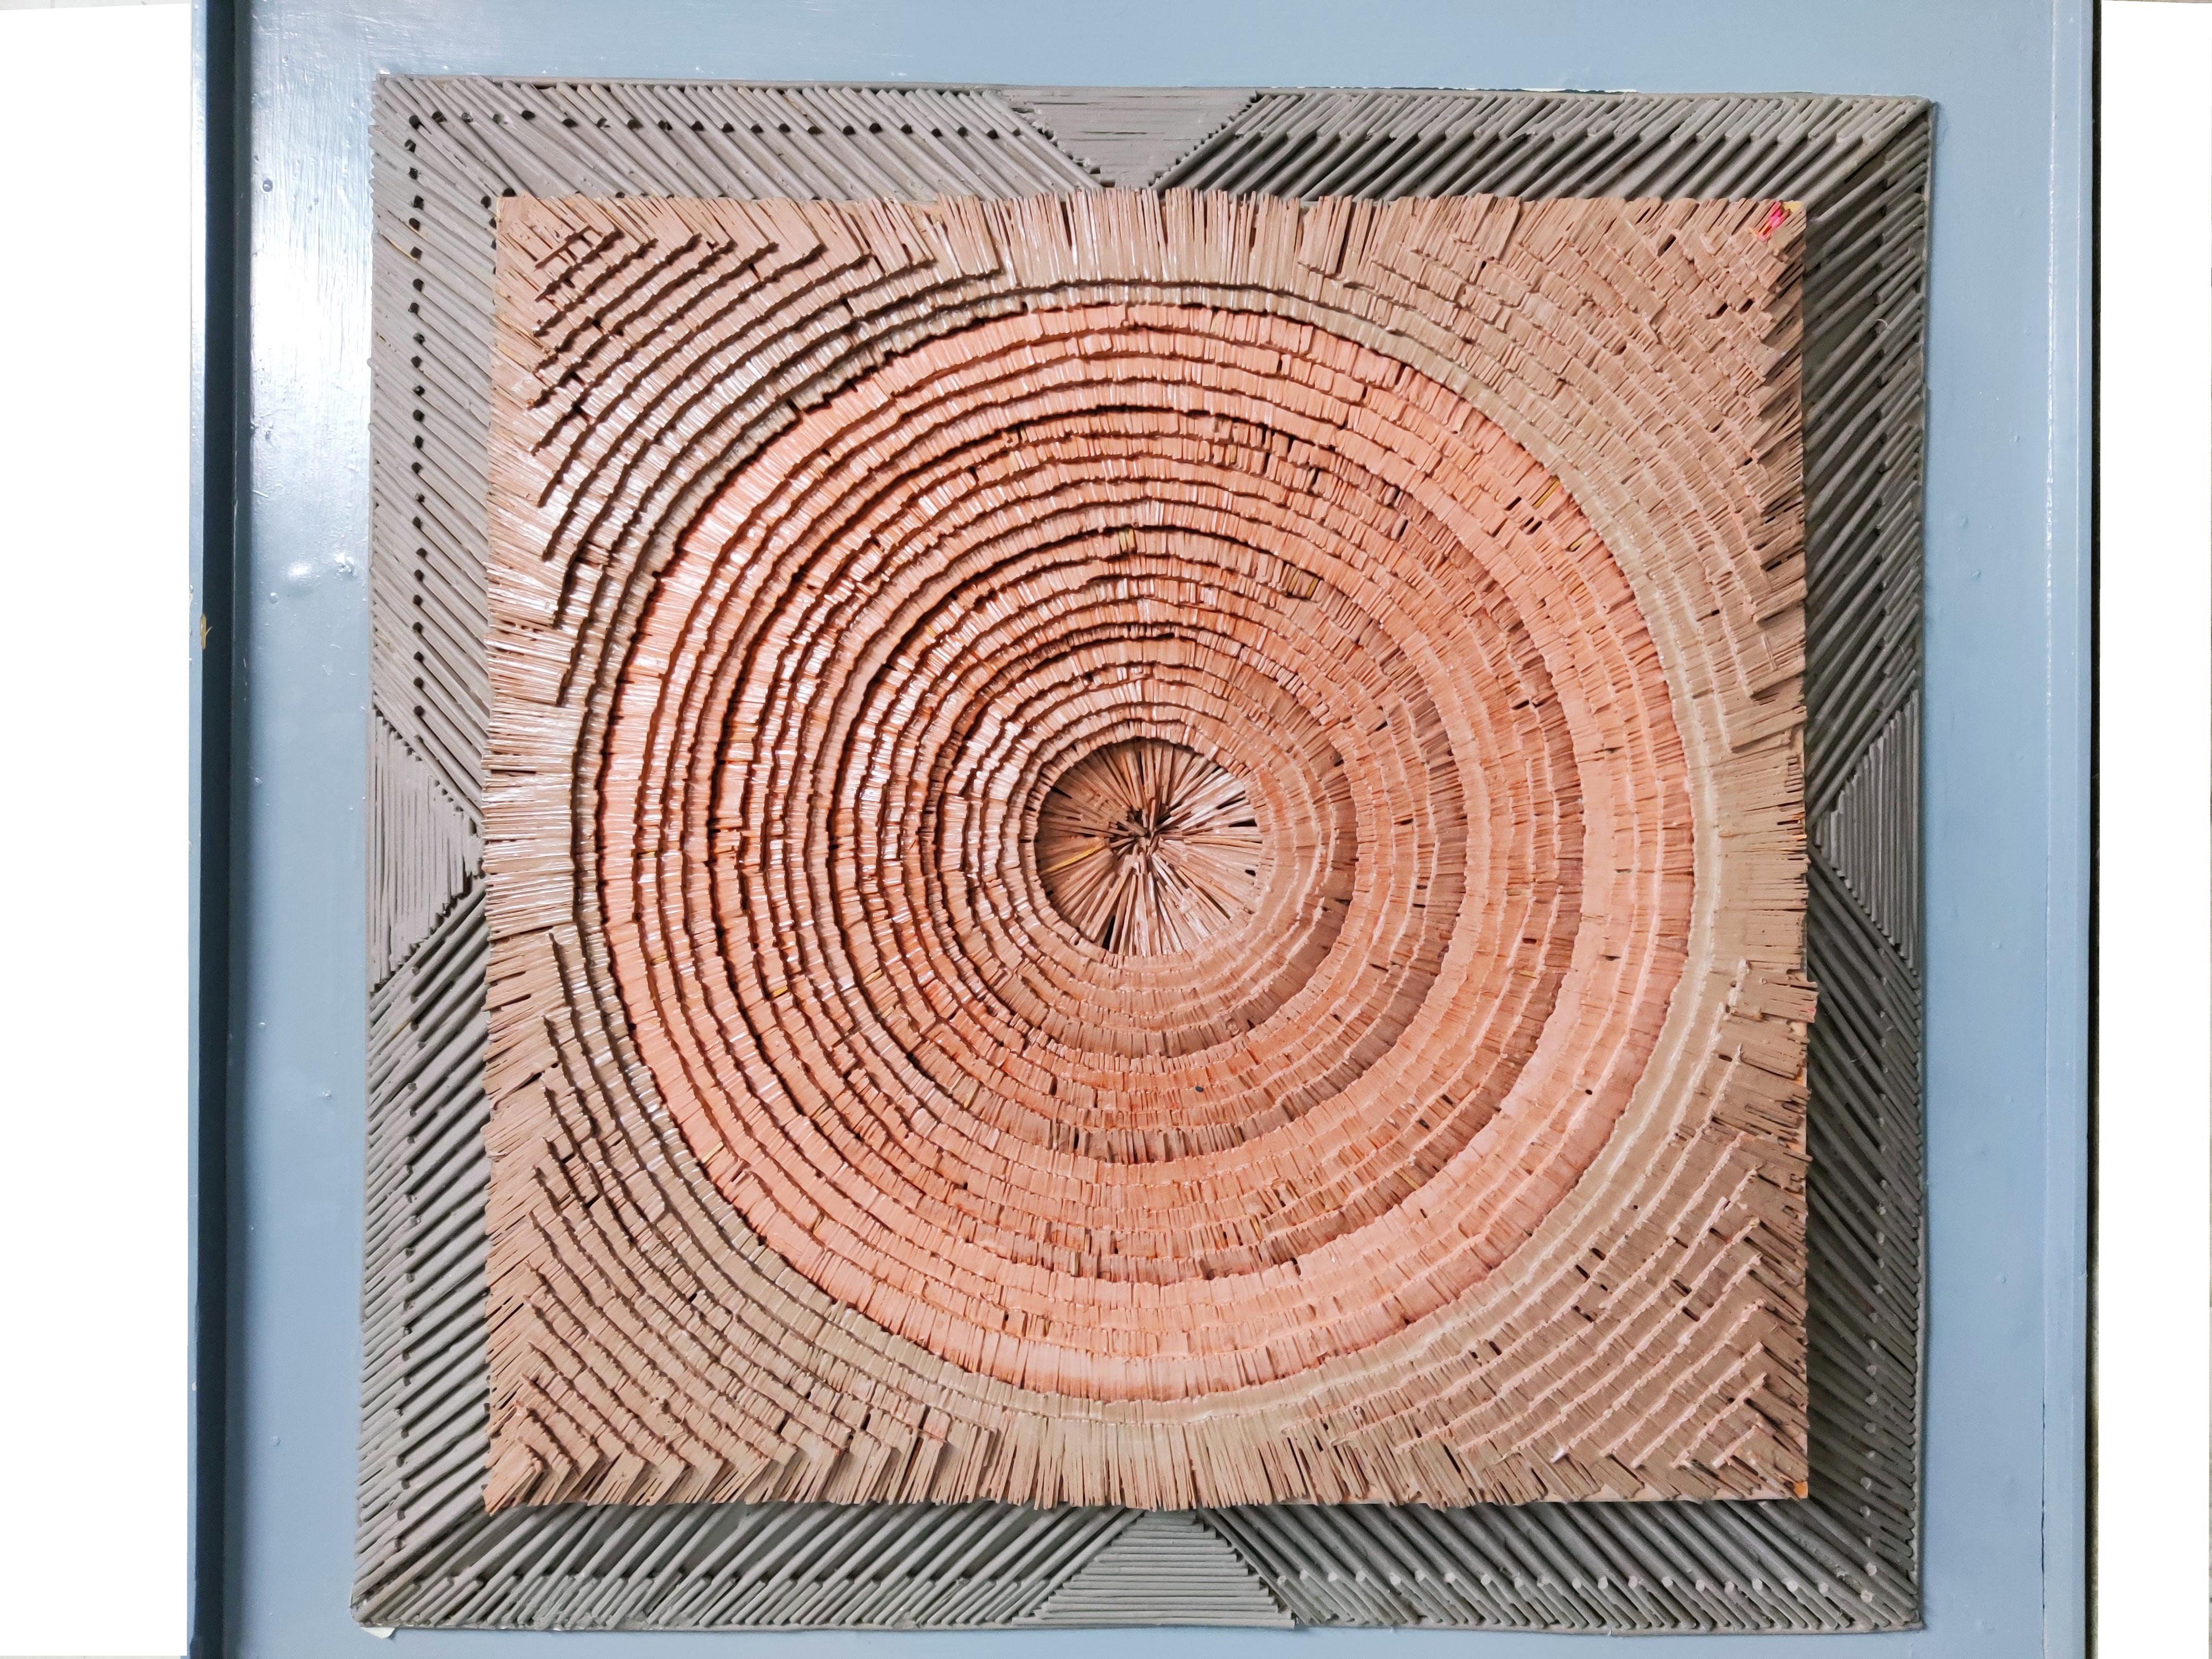 Stunning 3D hand made brutalist wall sculpture by Belgian artist Vic Gentils

The artwork is made out of tiny pieces of wood sticked togheter.

This time-consuming work creates a 3Deffect what makes this sculpture so unique.

Framed with a blue